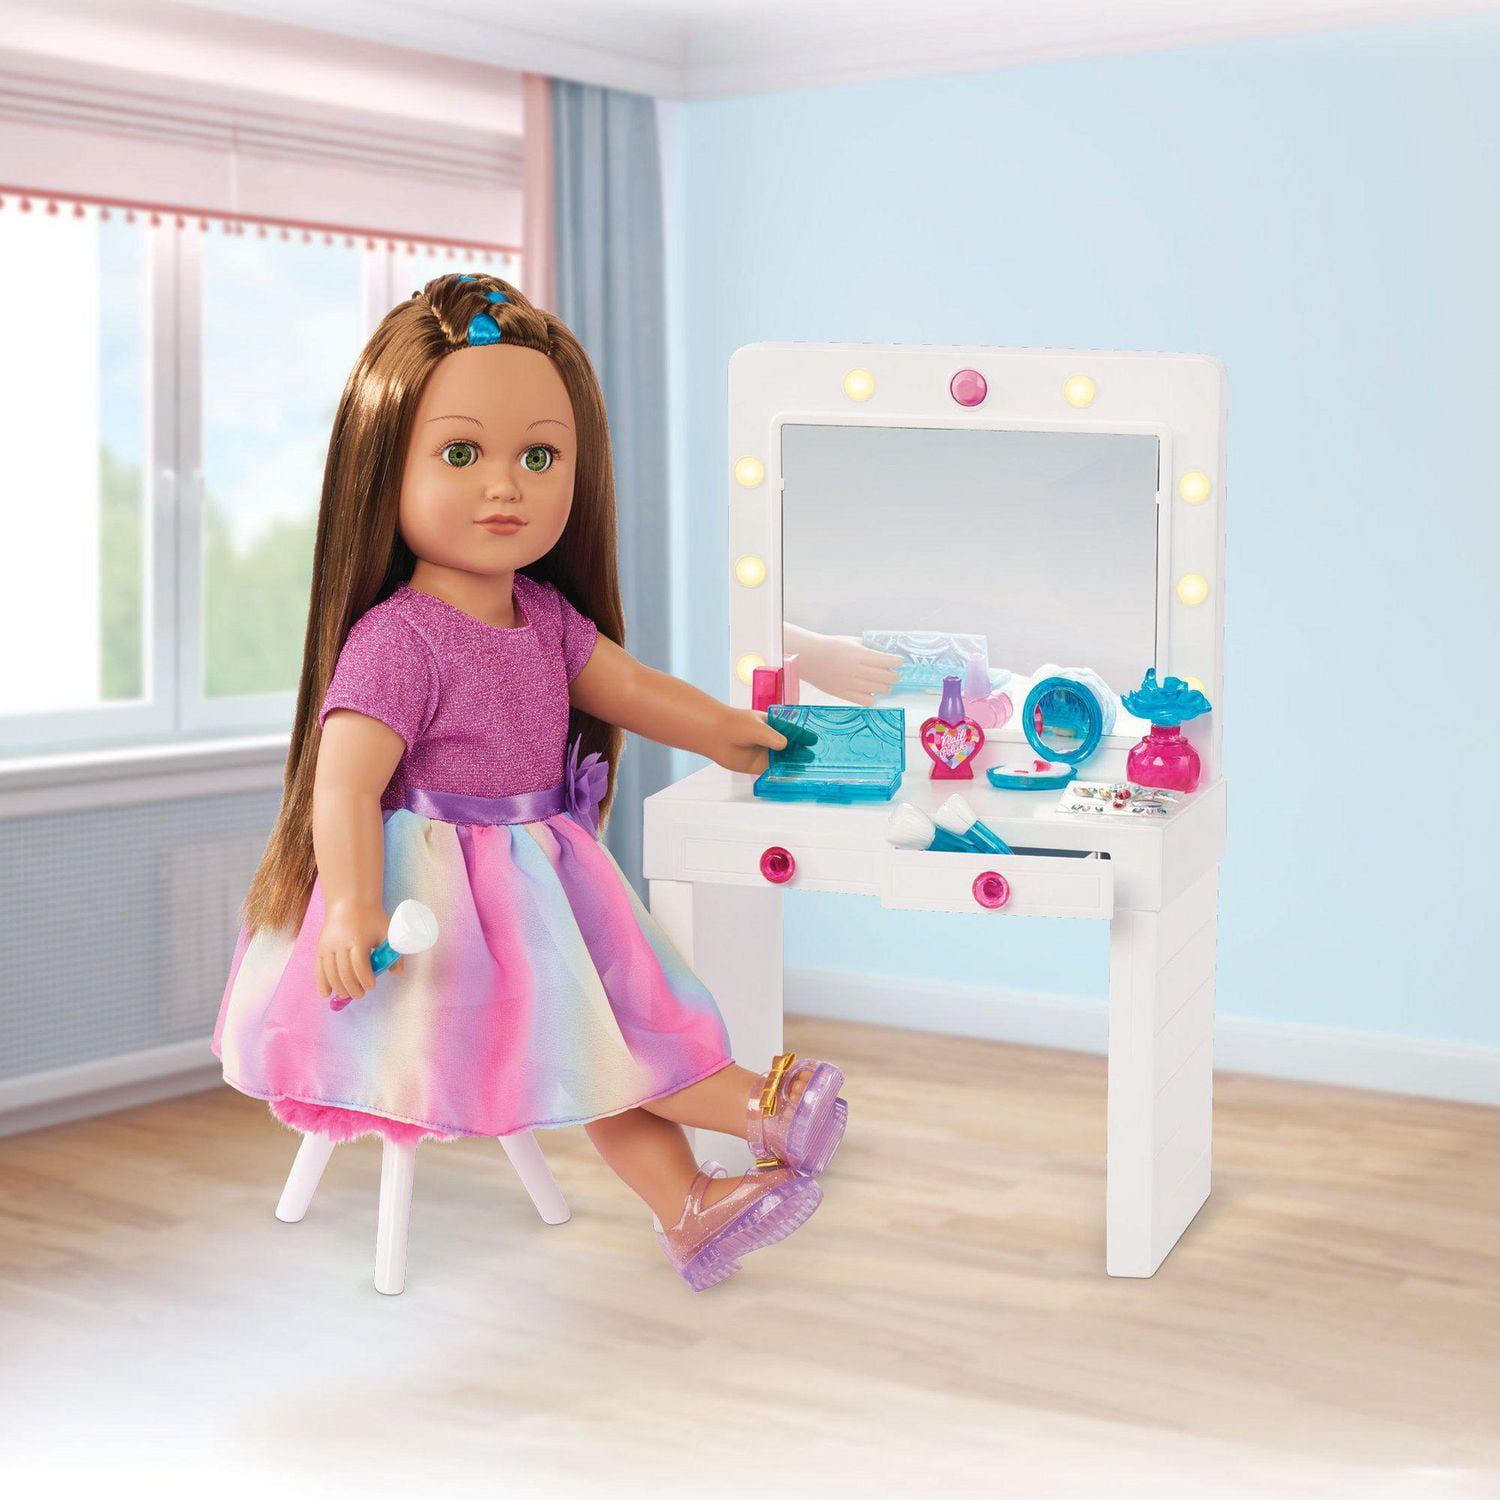 18-Inch Doll Furniture - Mirrored Closet with Ballet Barre - fits American  Girl ® Dolls